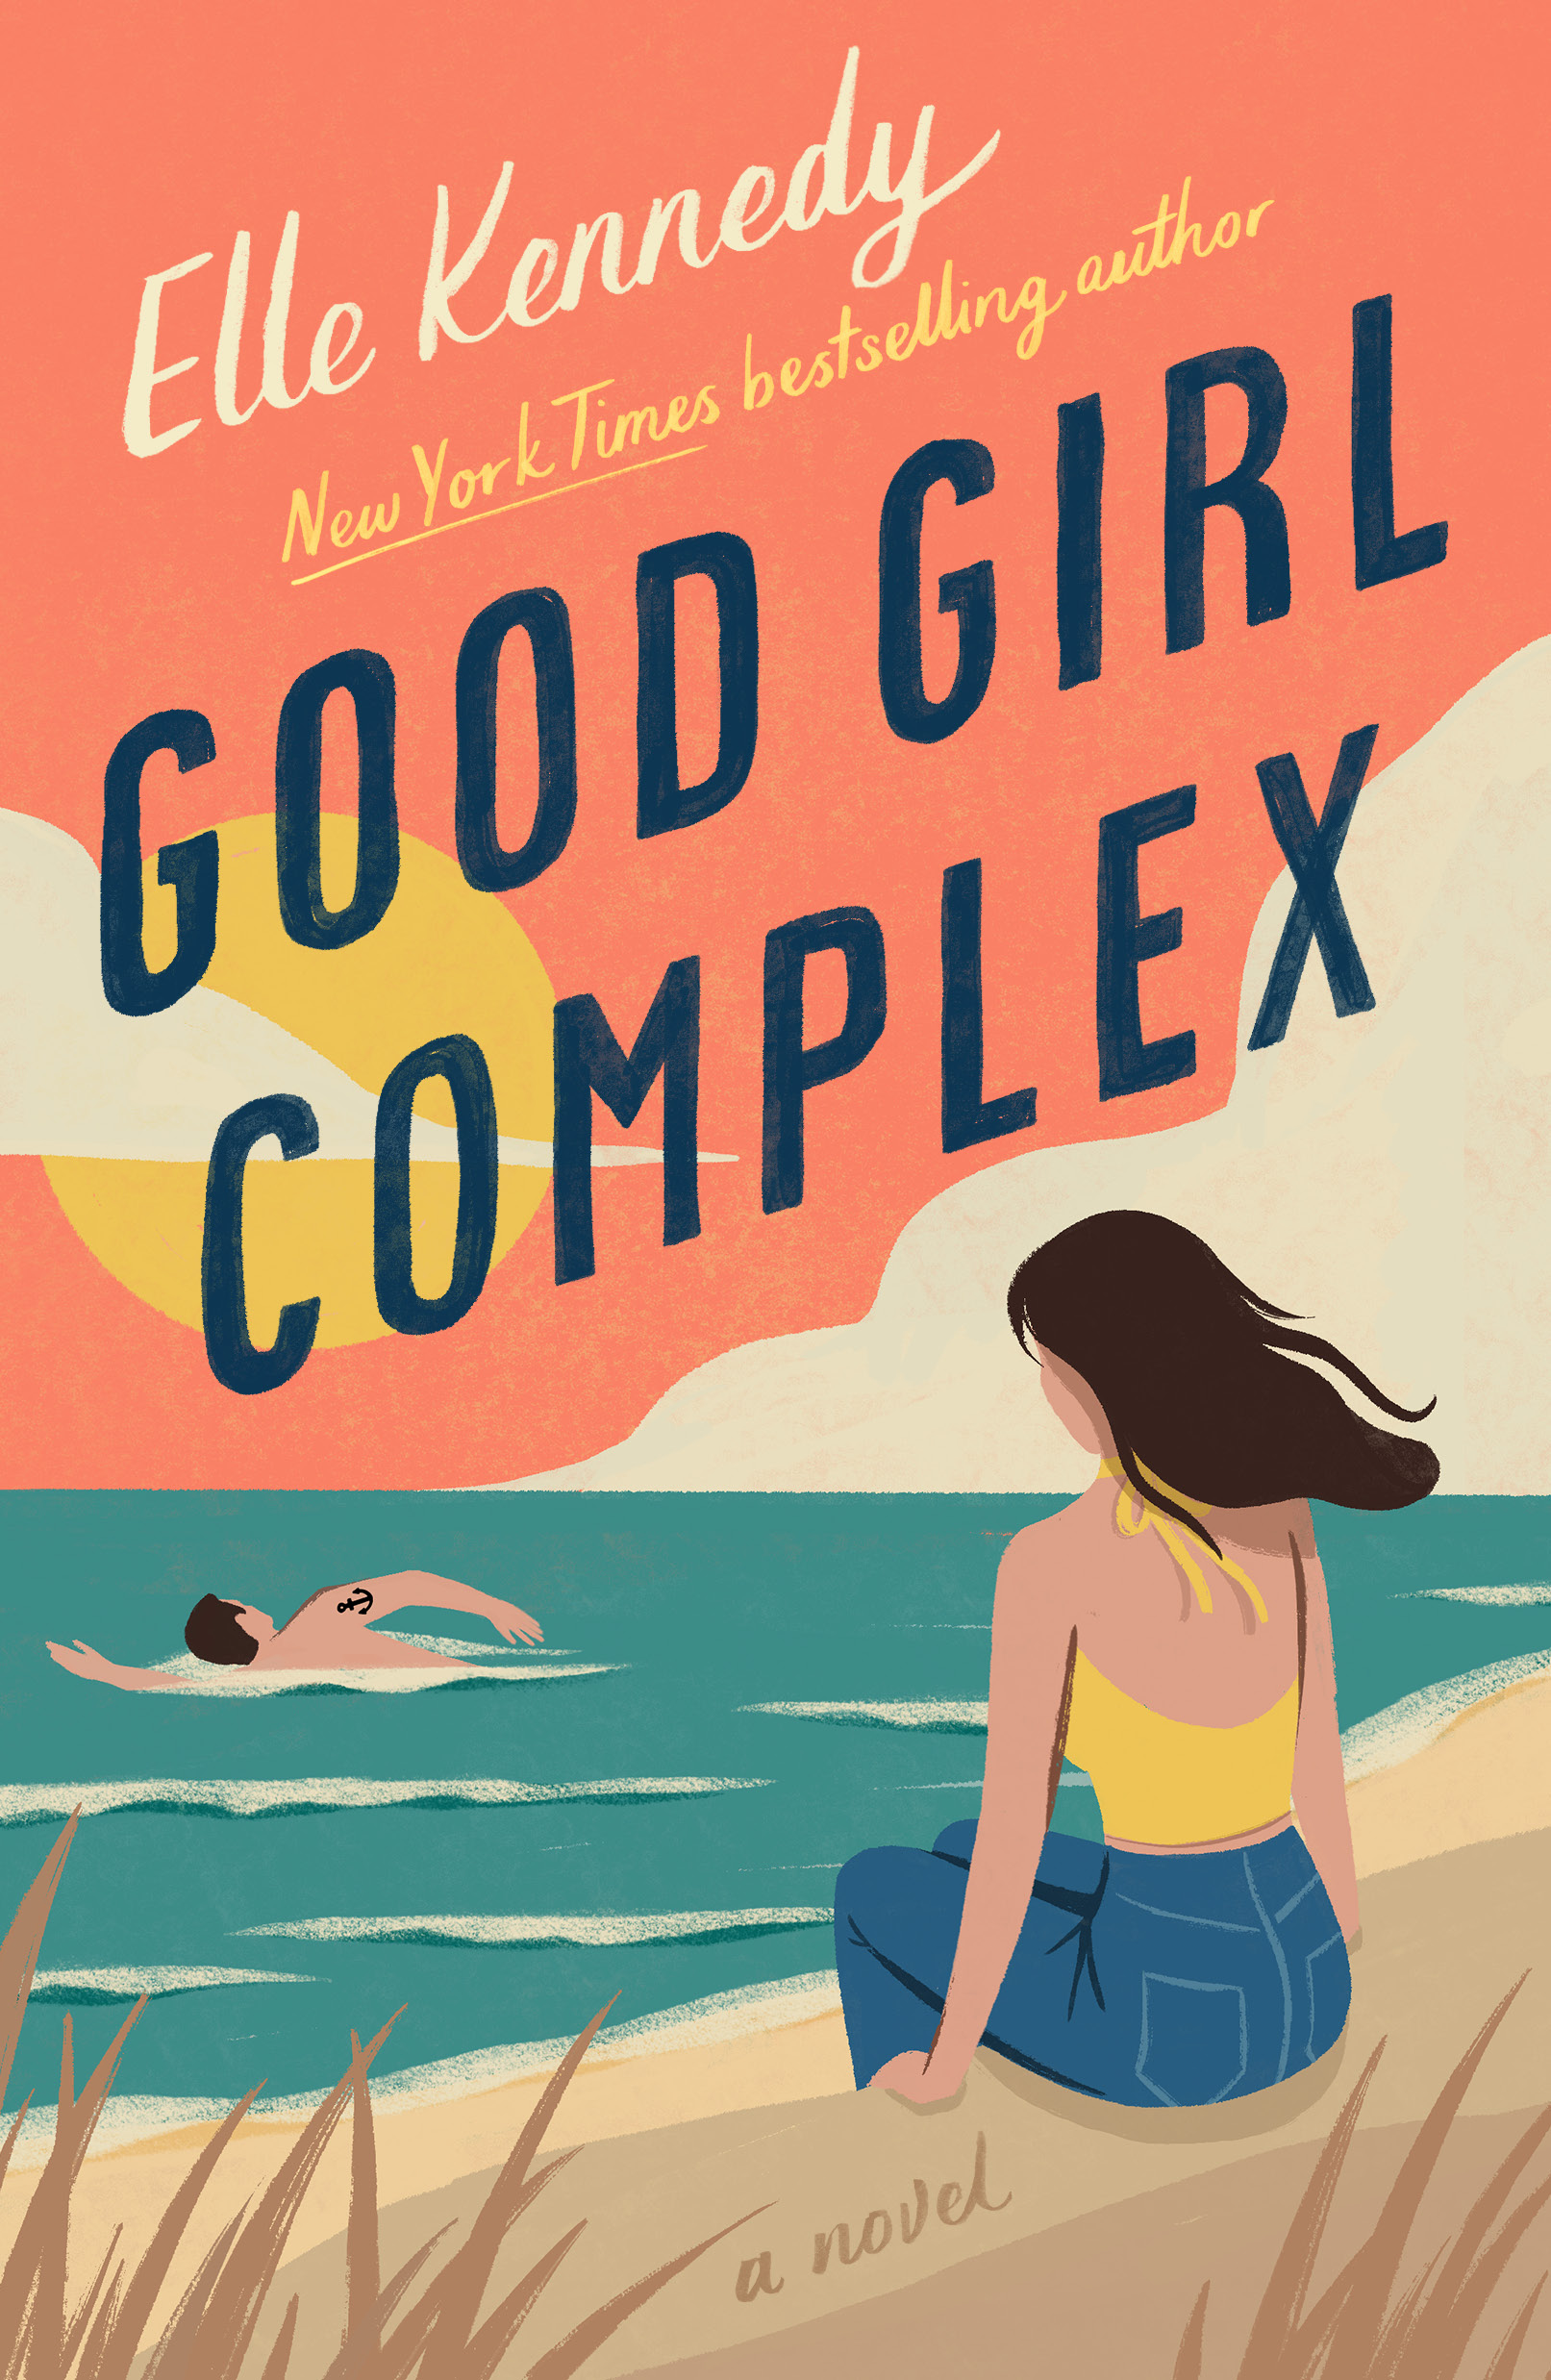 GOOD GIRL COMPLEX Cover – Elle Kennedy